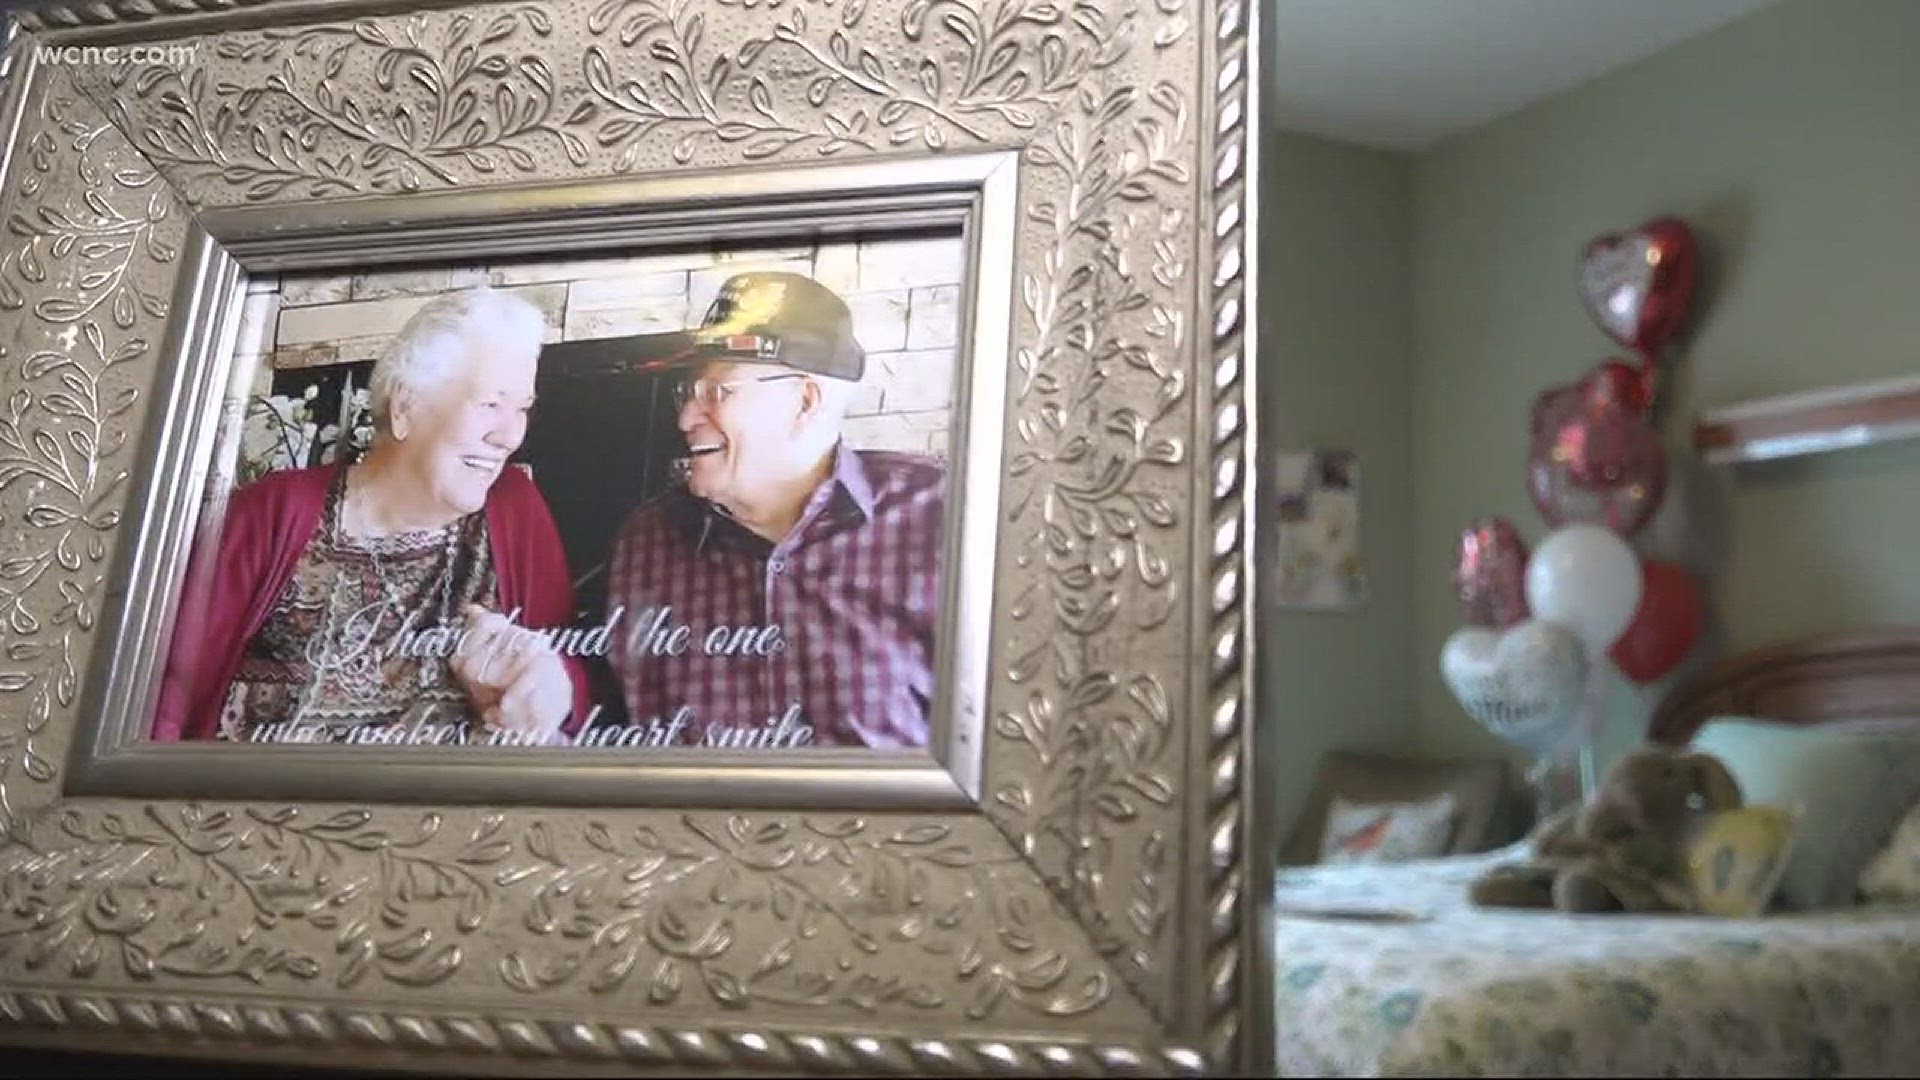 A ninety year old couple proves it's never too late for love after falling in love and planning a wedding in March